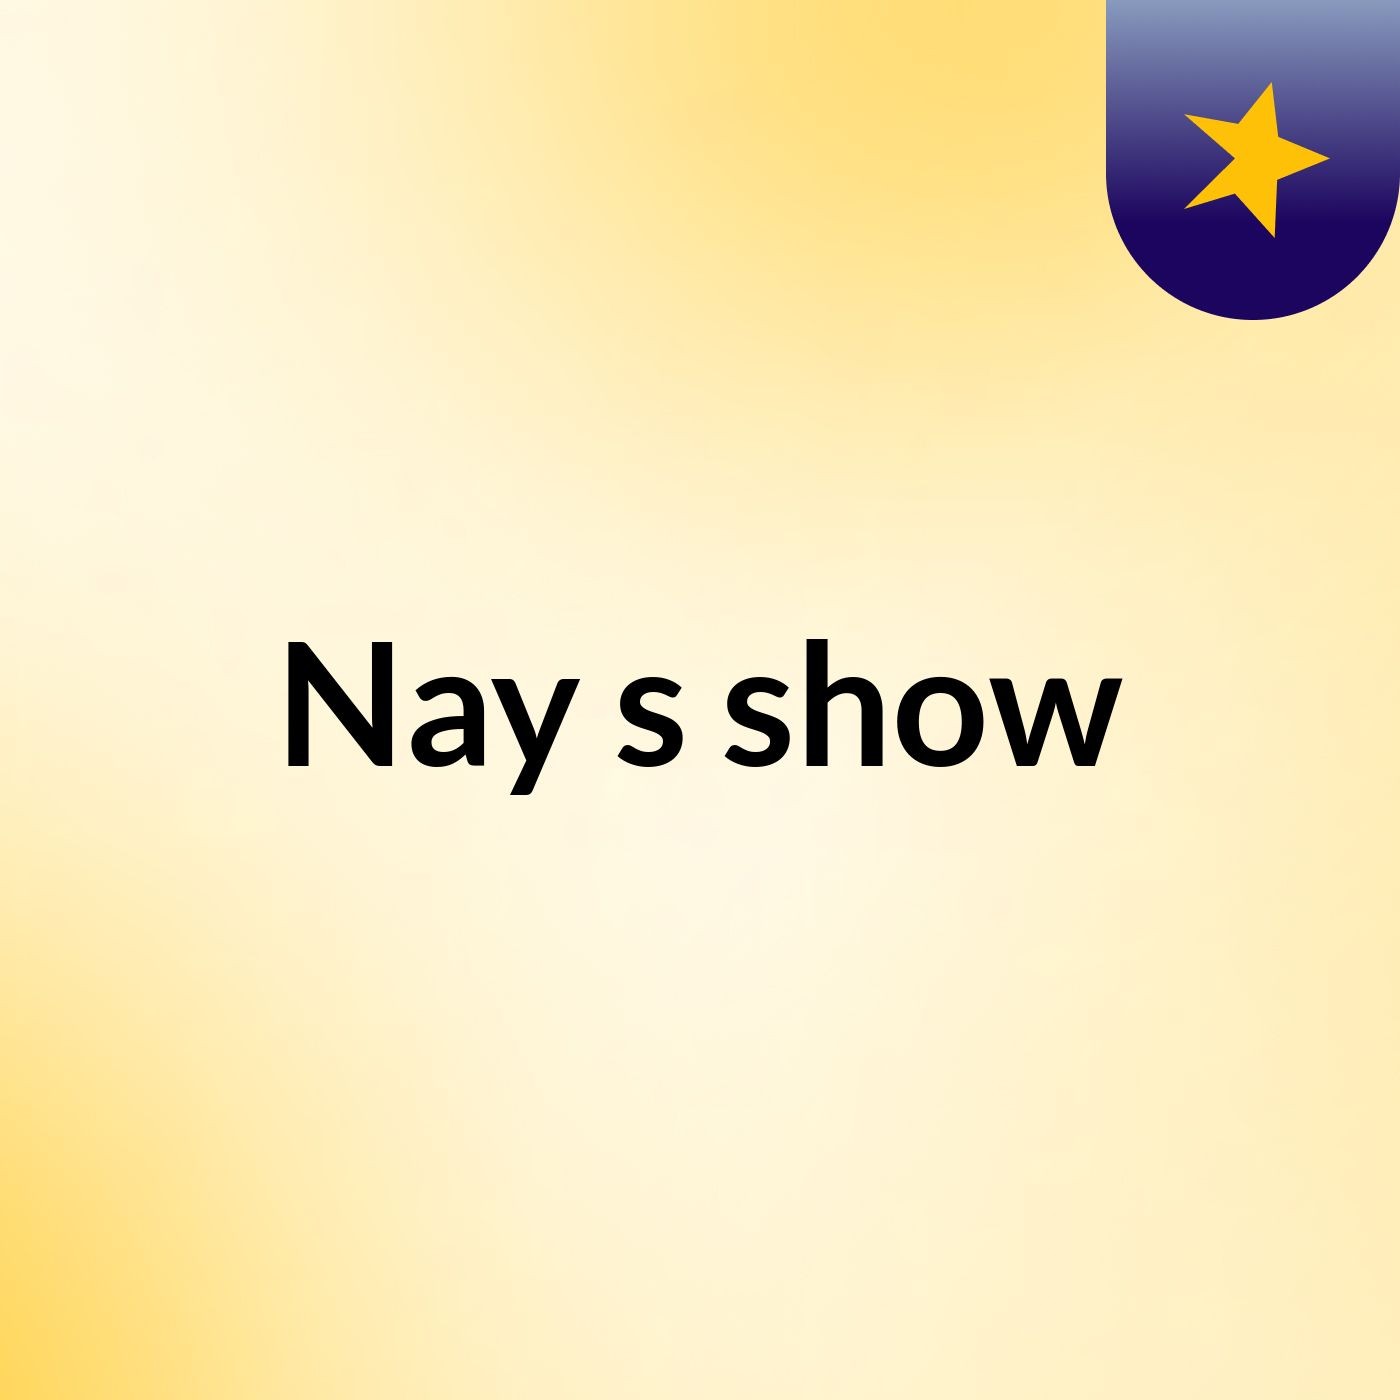 Nay's show